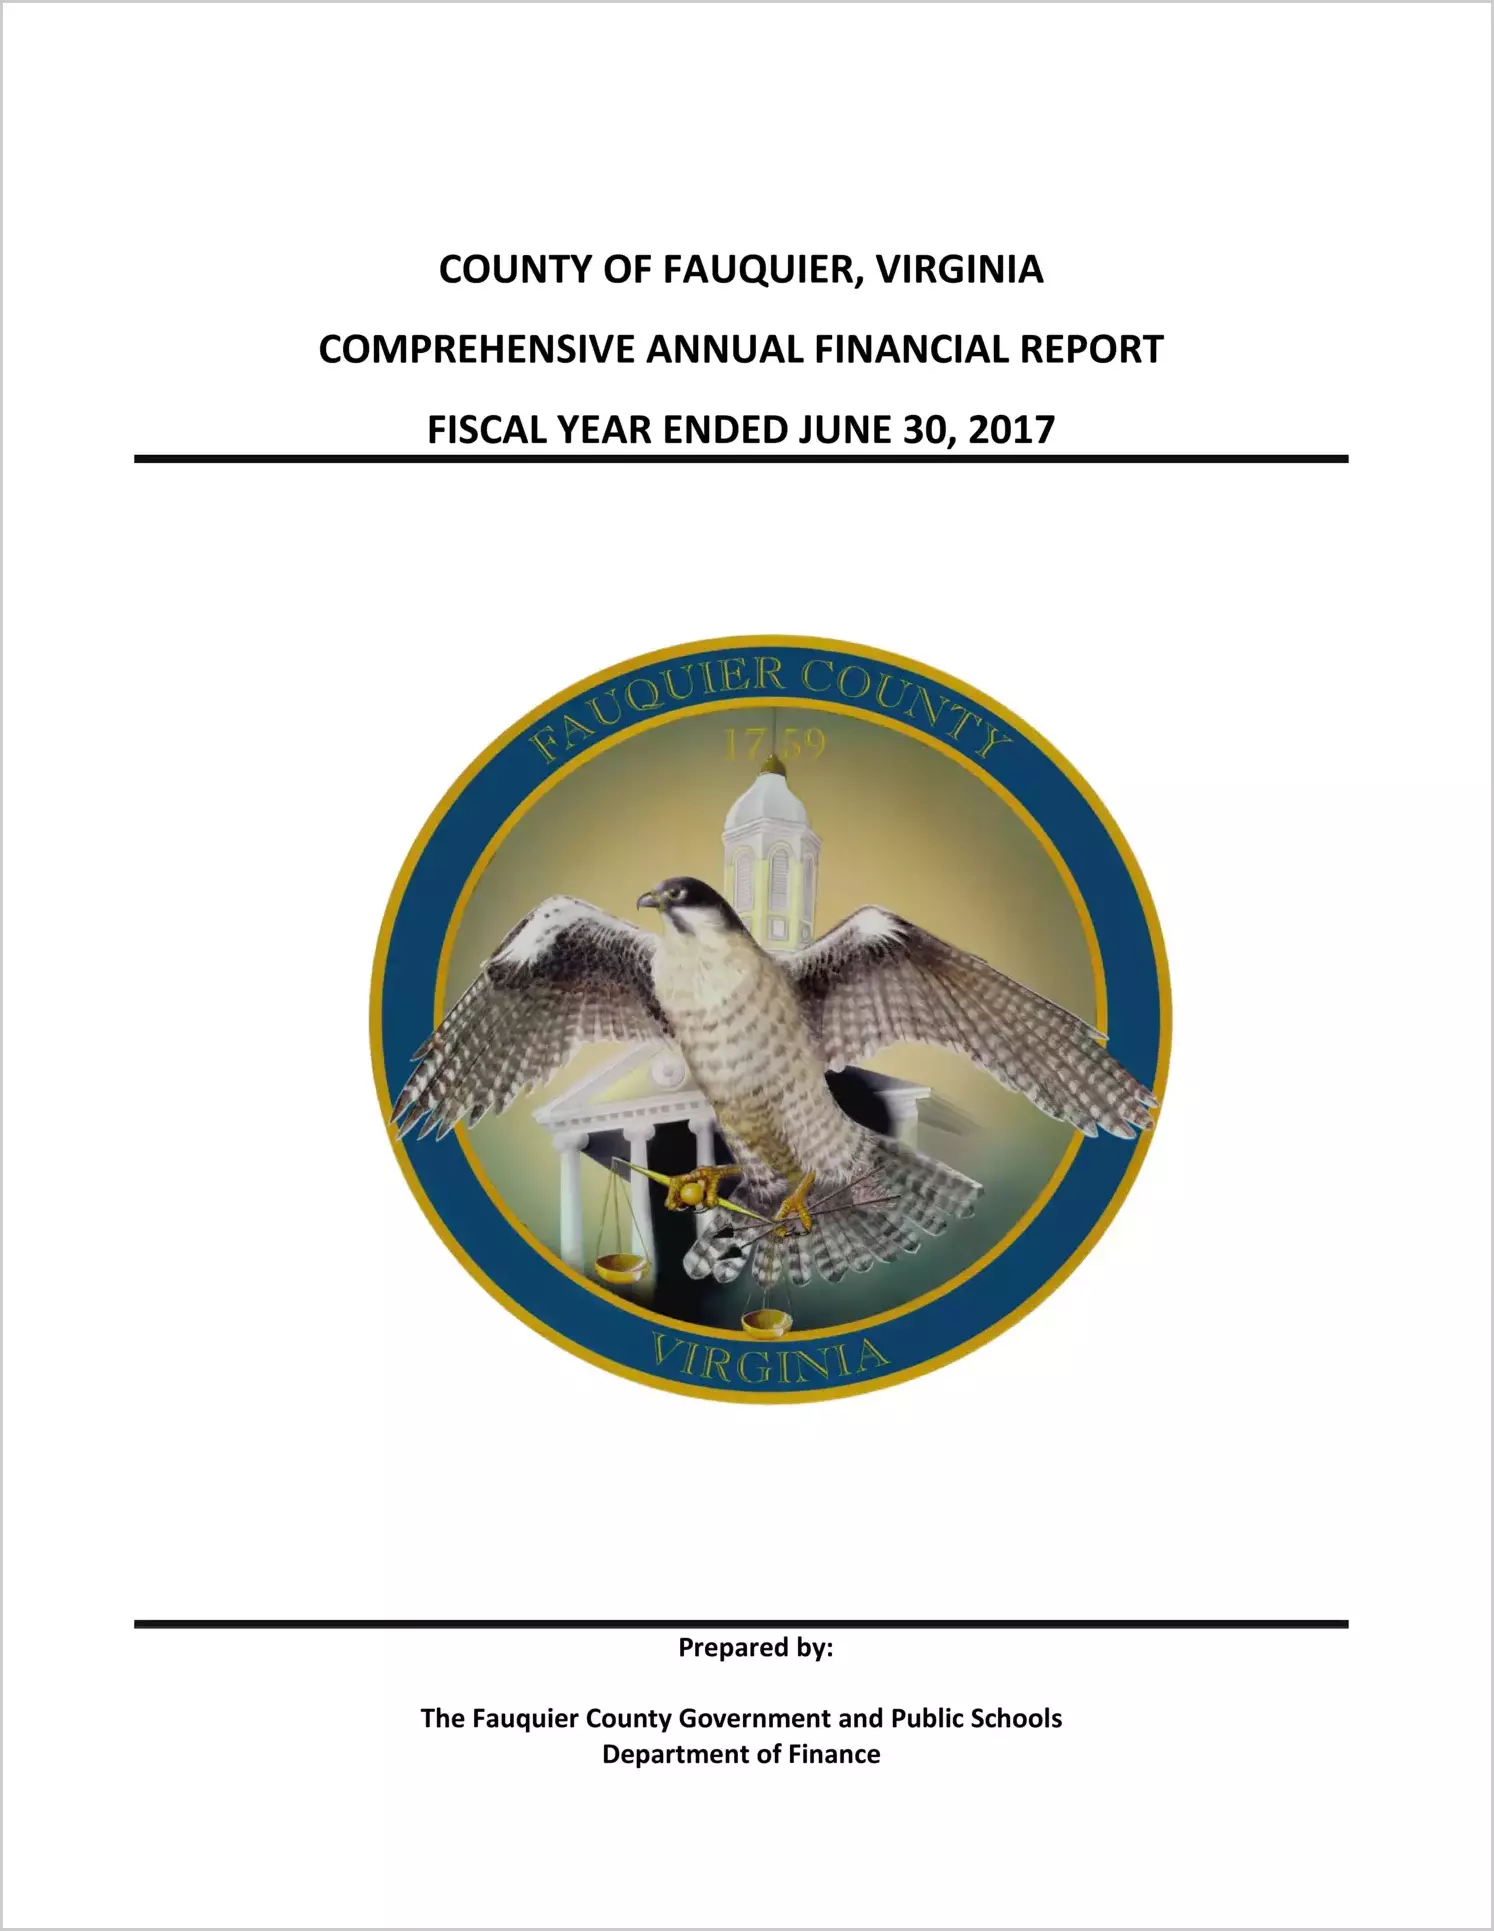 2017 Annual Financial Report for County of Fauquier